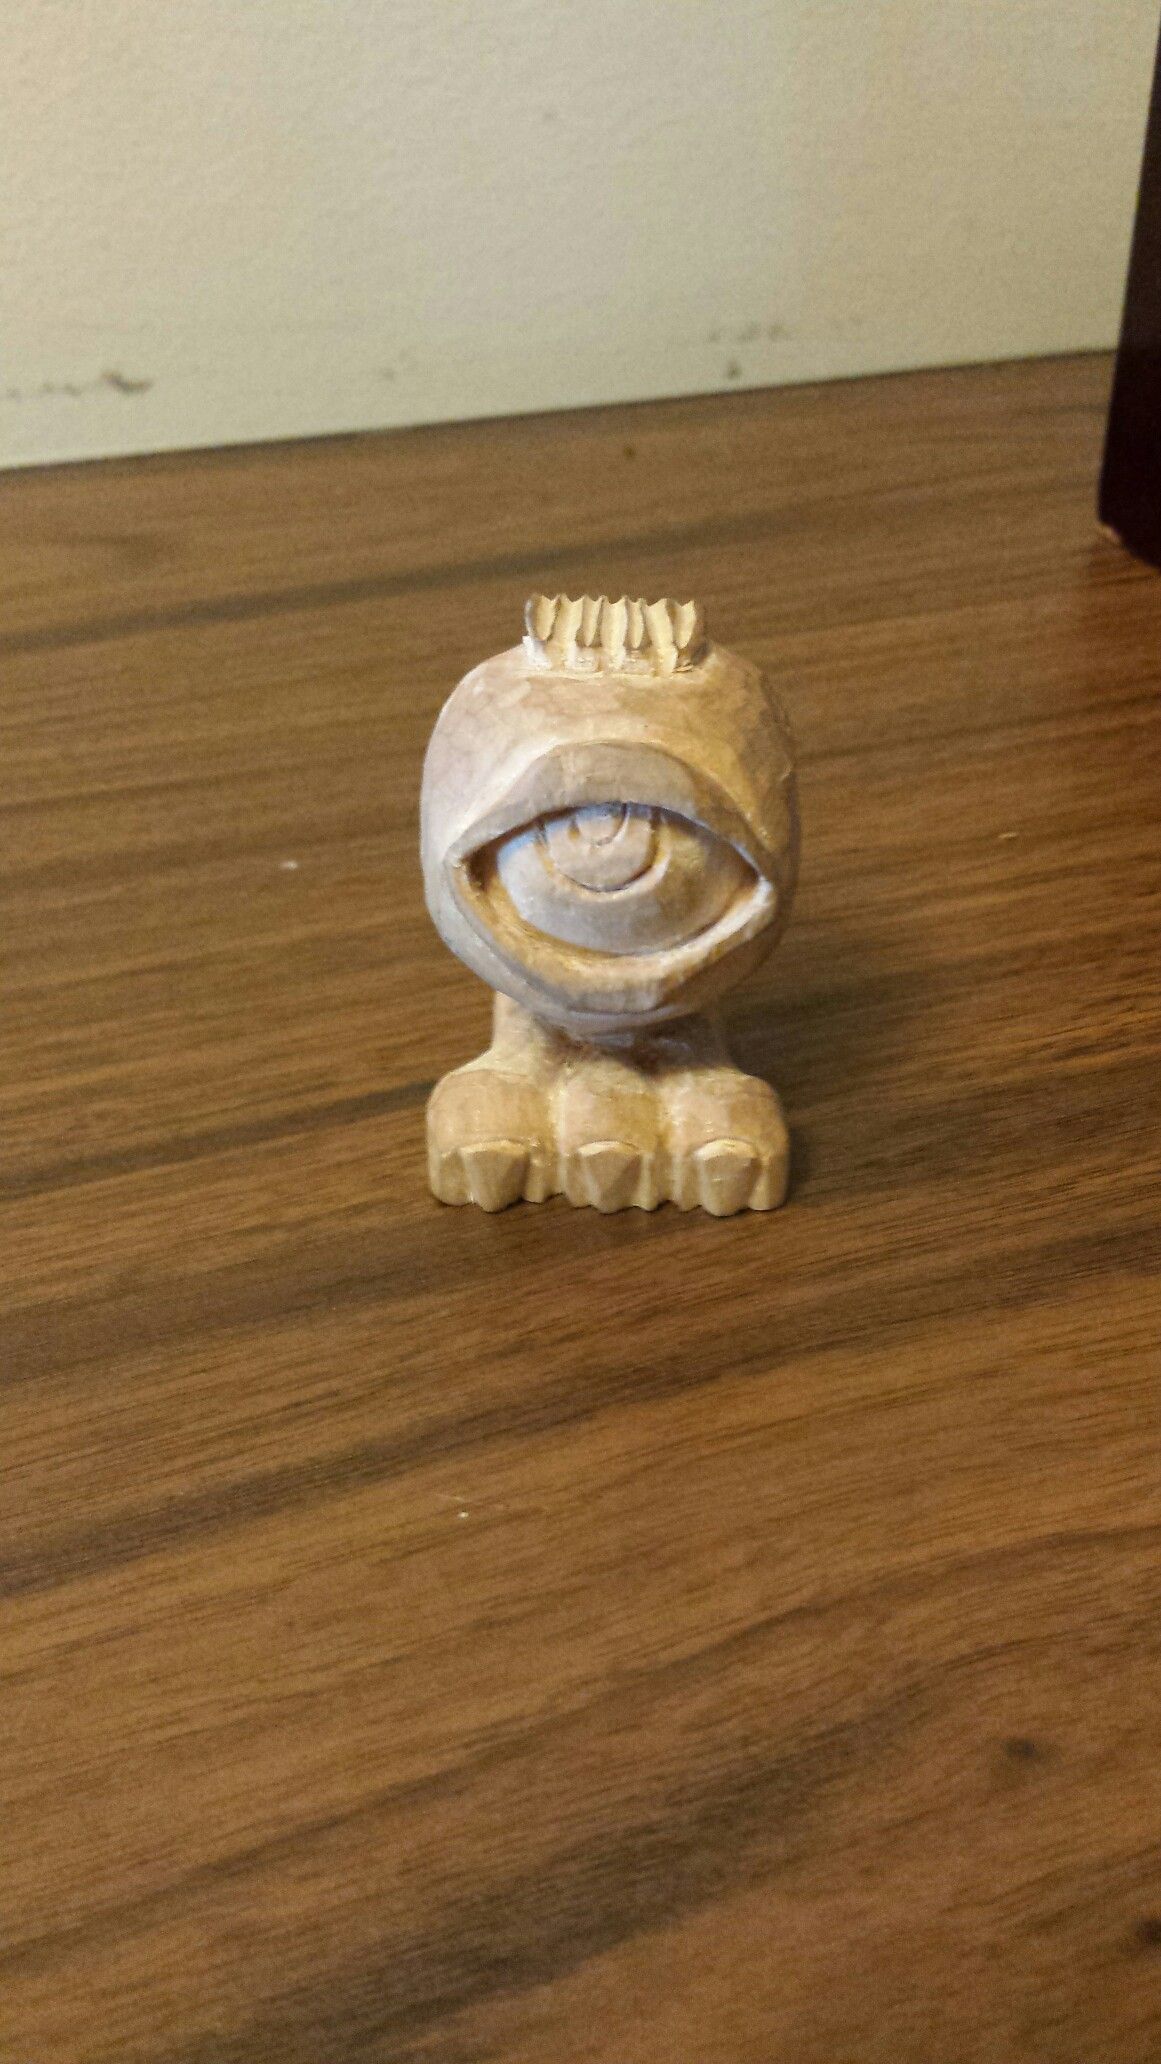 Wood carving little monster eye guy. Pawn for new chess set. By ...